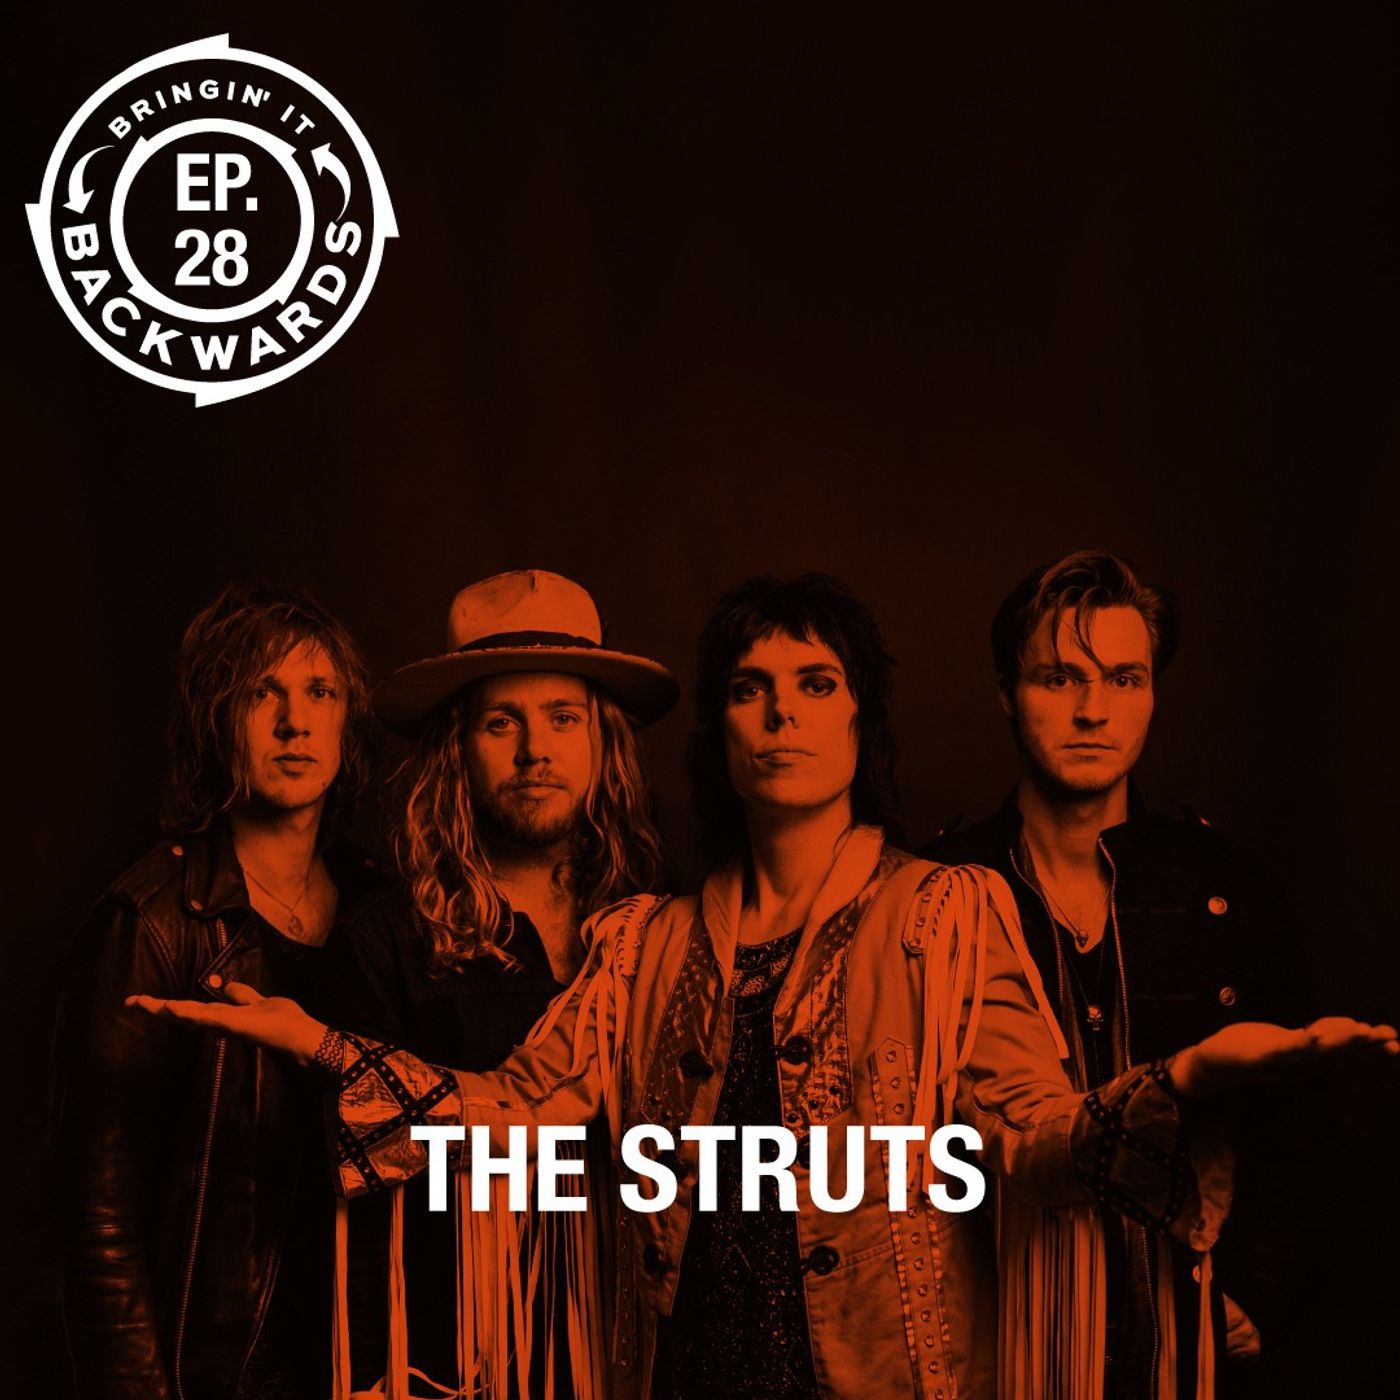 Interview with The Struts